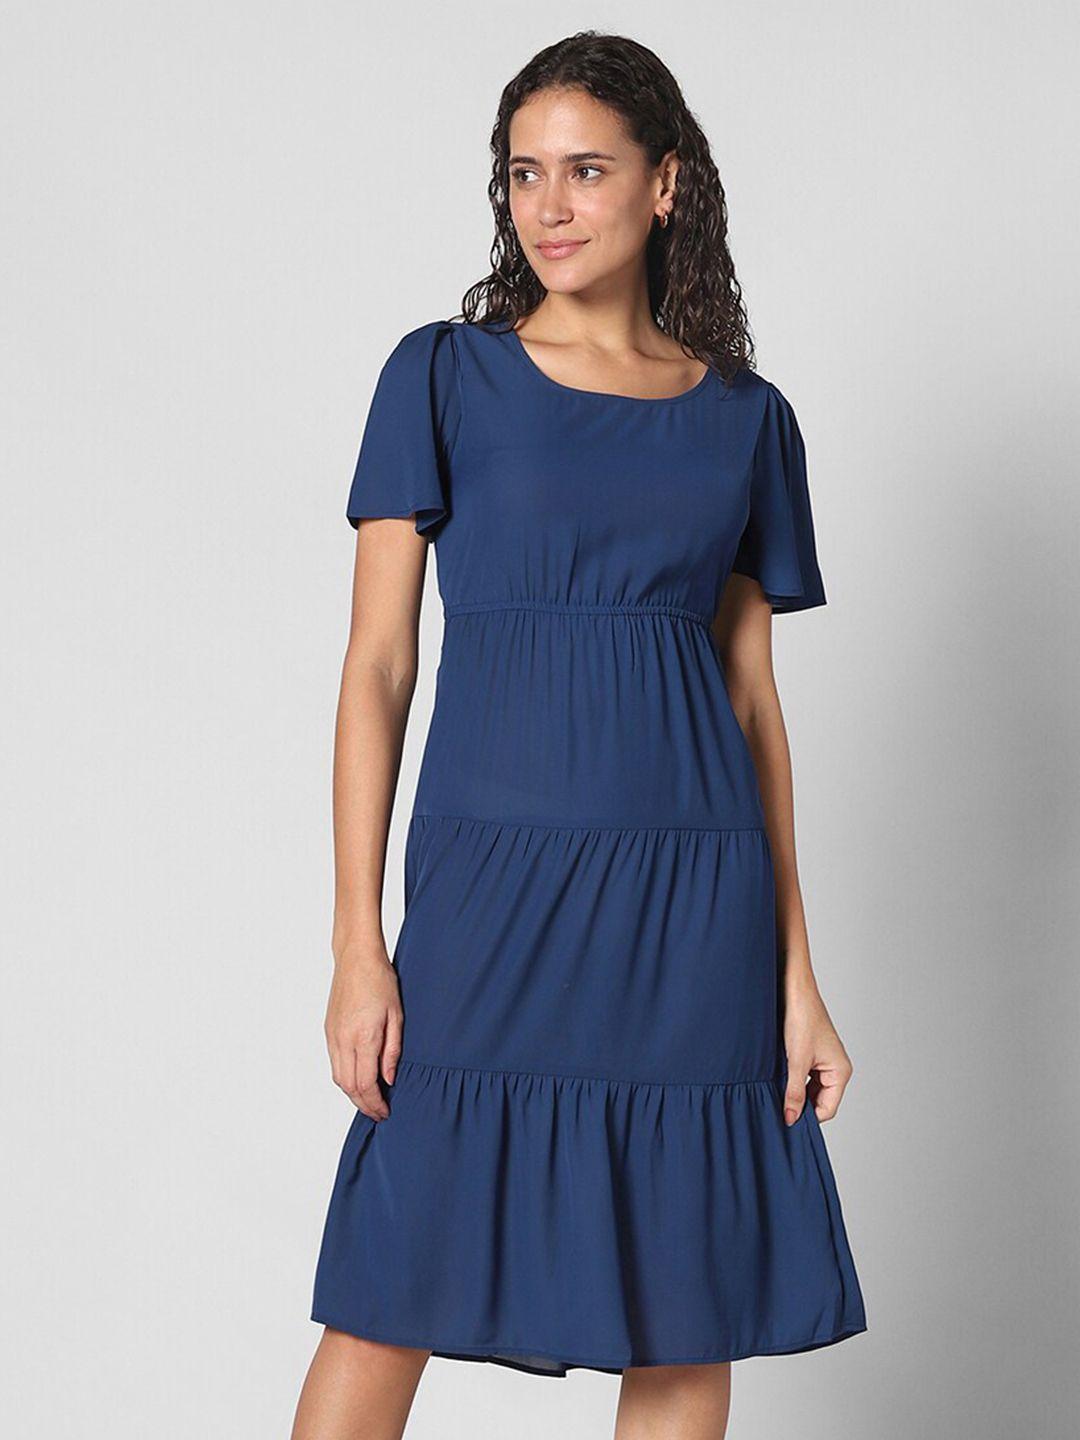 pantaloons round neck tiered fit & flare dress